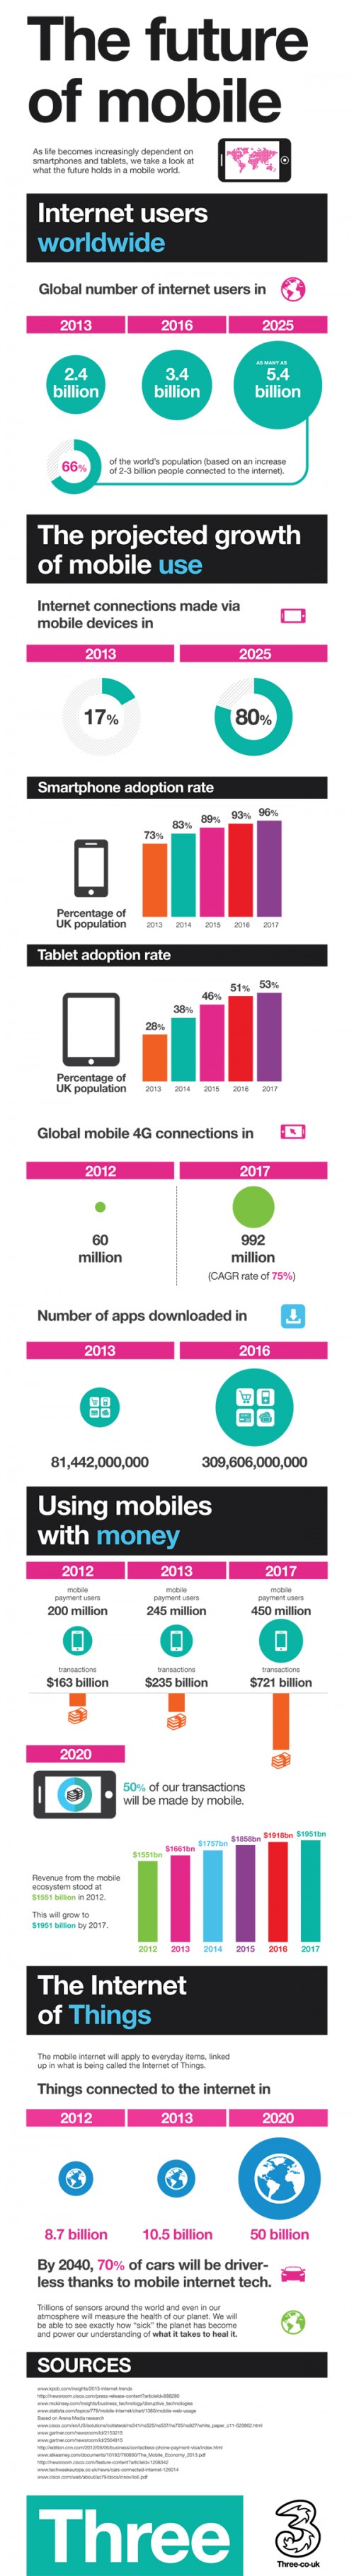 The Future Of Mobile & The Internet Of Things (Infographic)